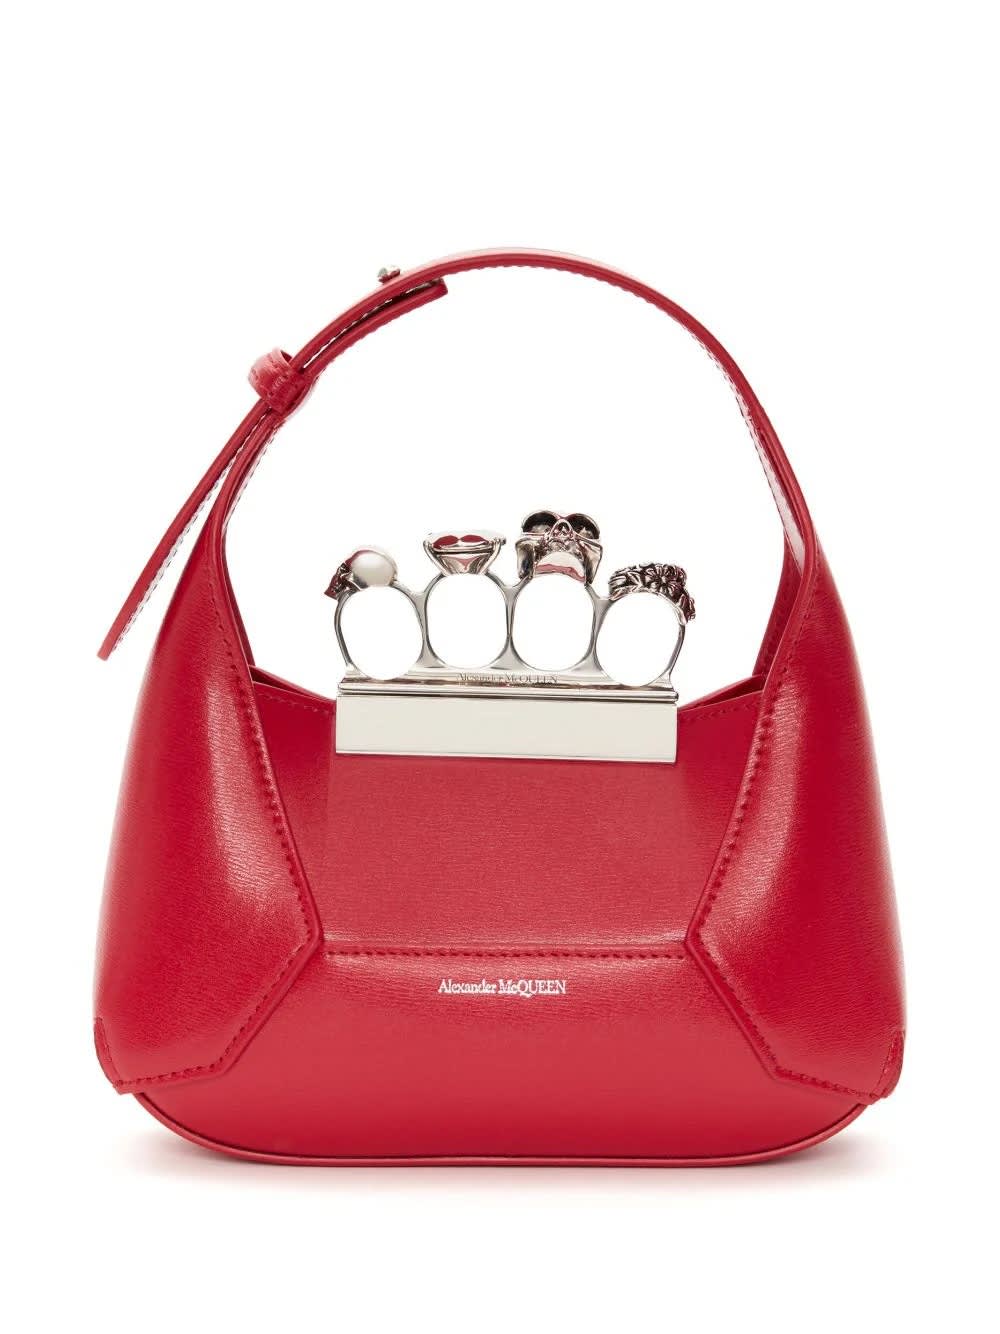 ALEXANDER MCQUEEN THE JEWELLED HOBO MINI BAG IN RED AND SILVER